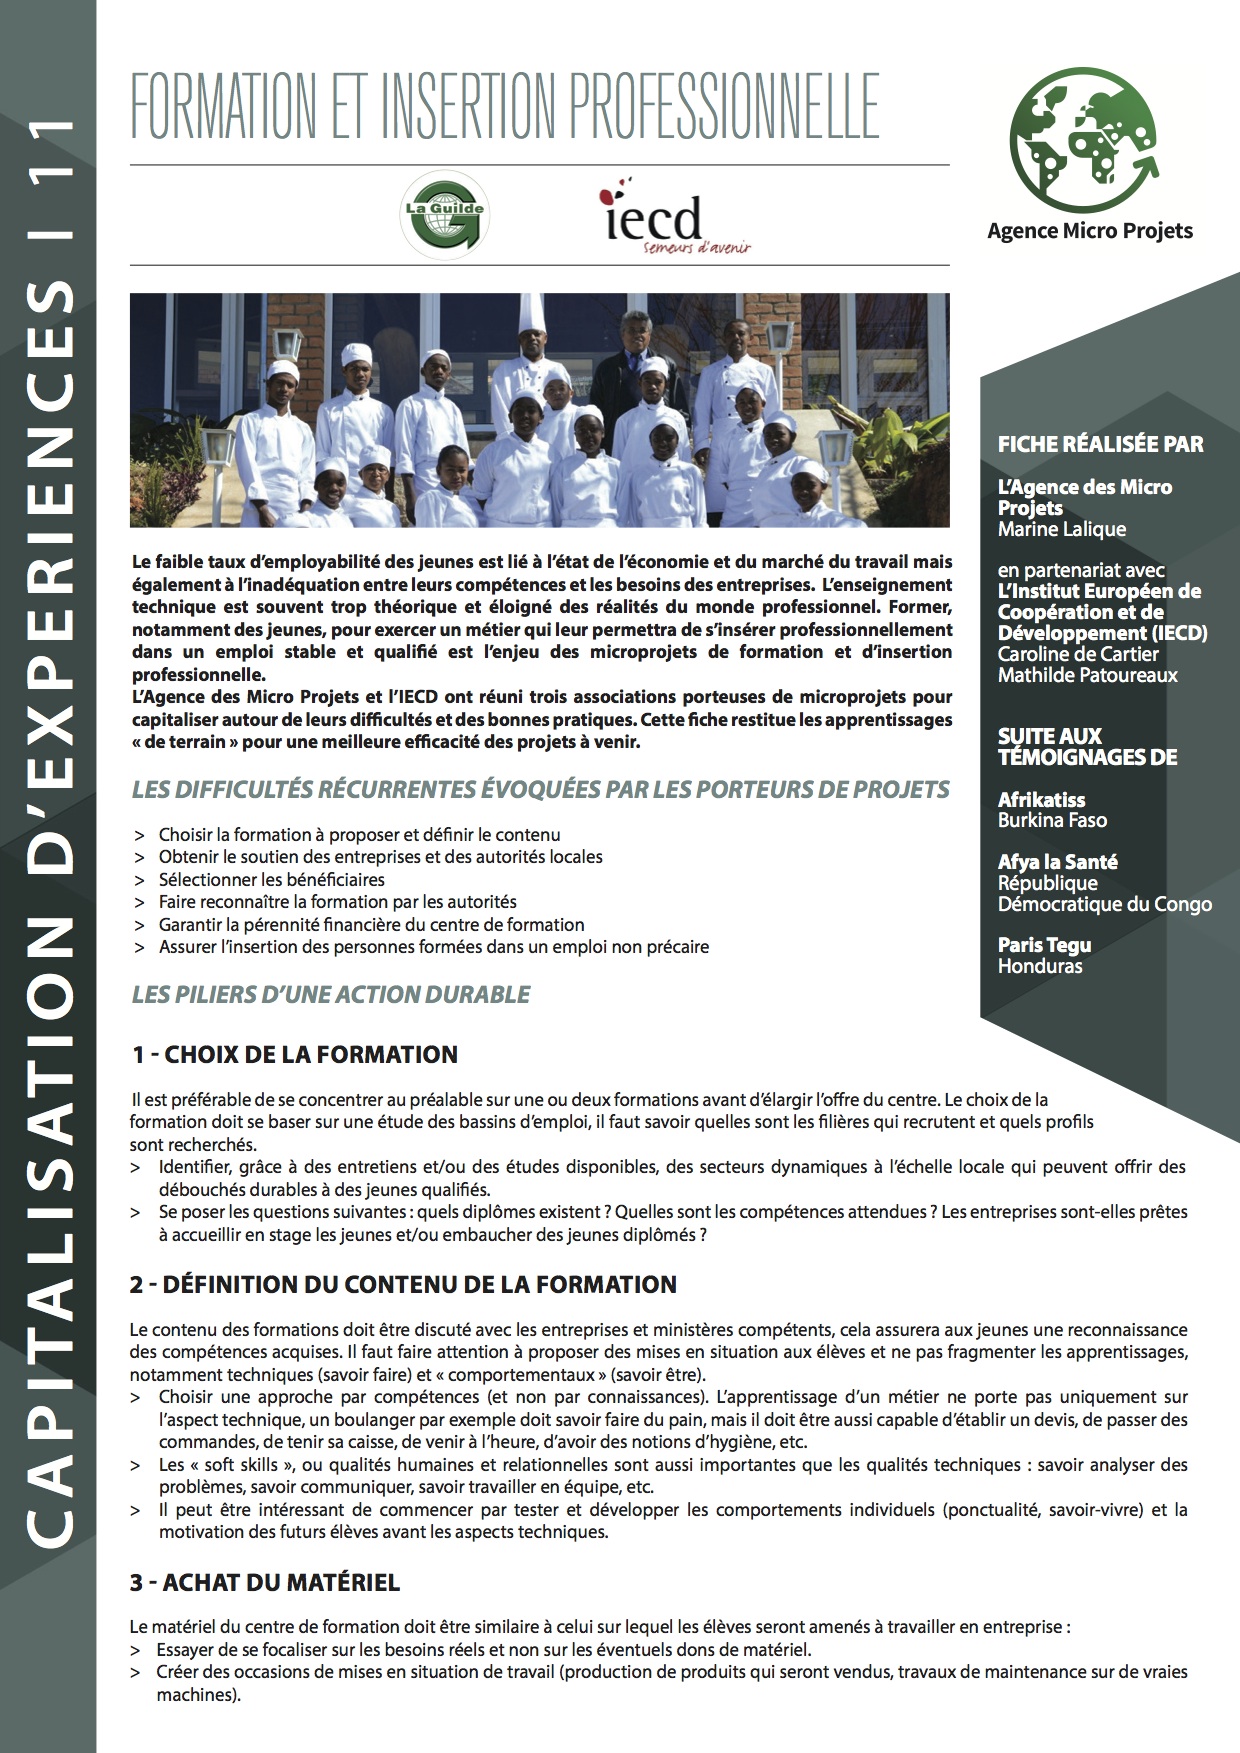 Formation Et Insertion Professionnelle Mediatheque Des Microprojets